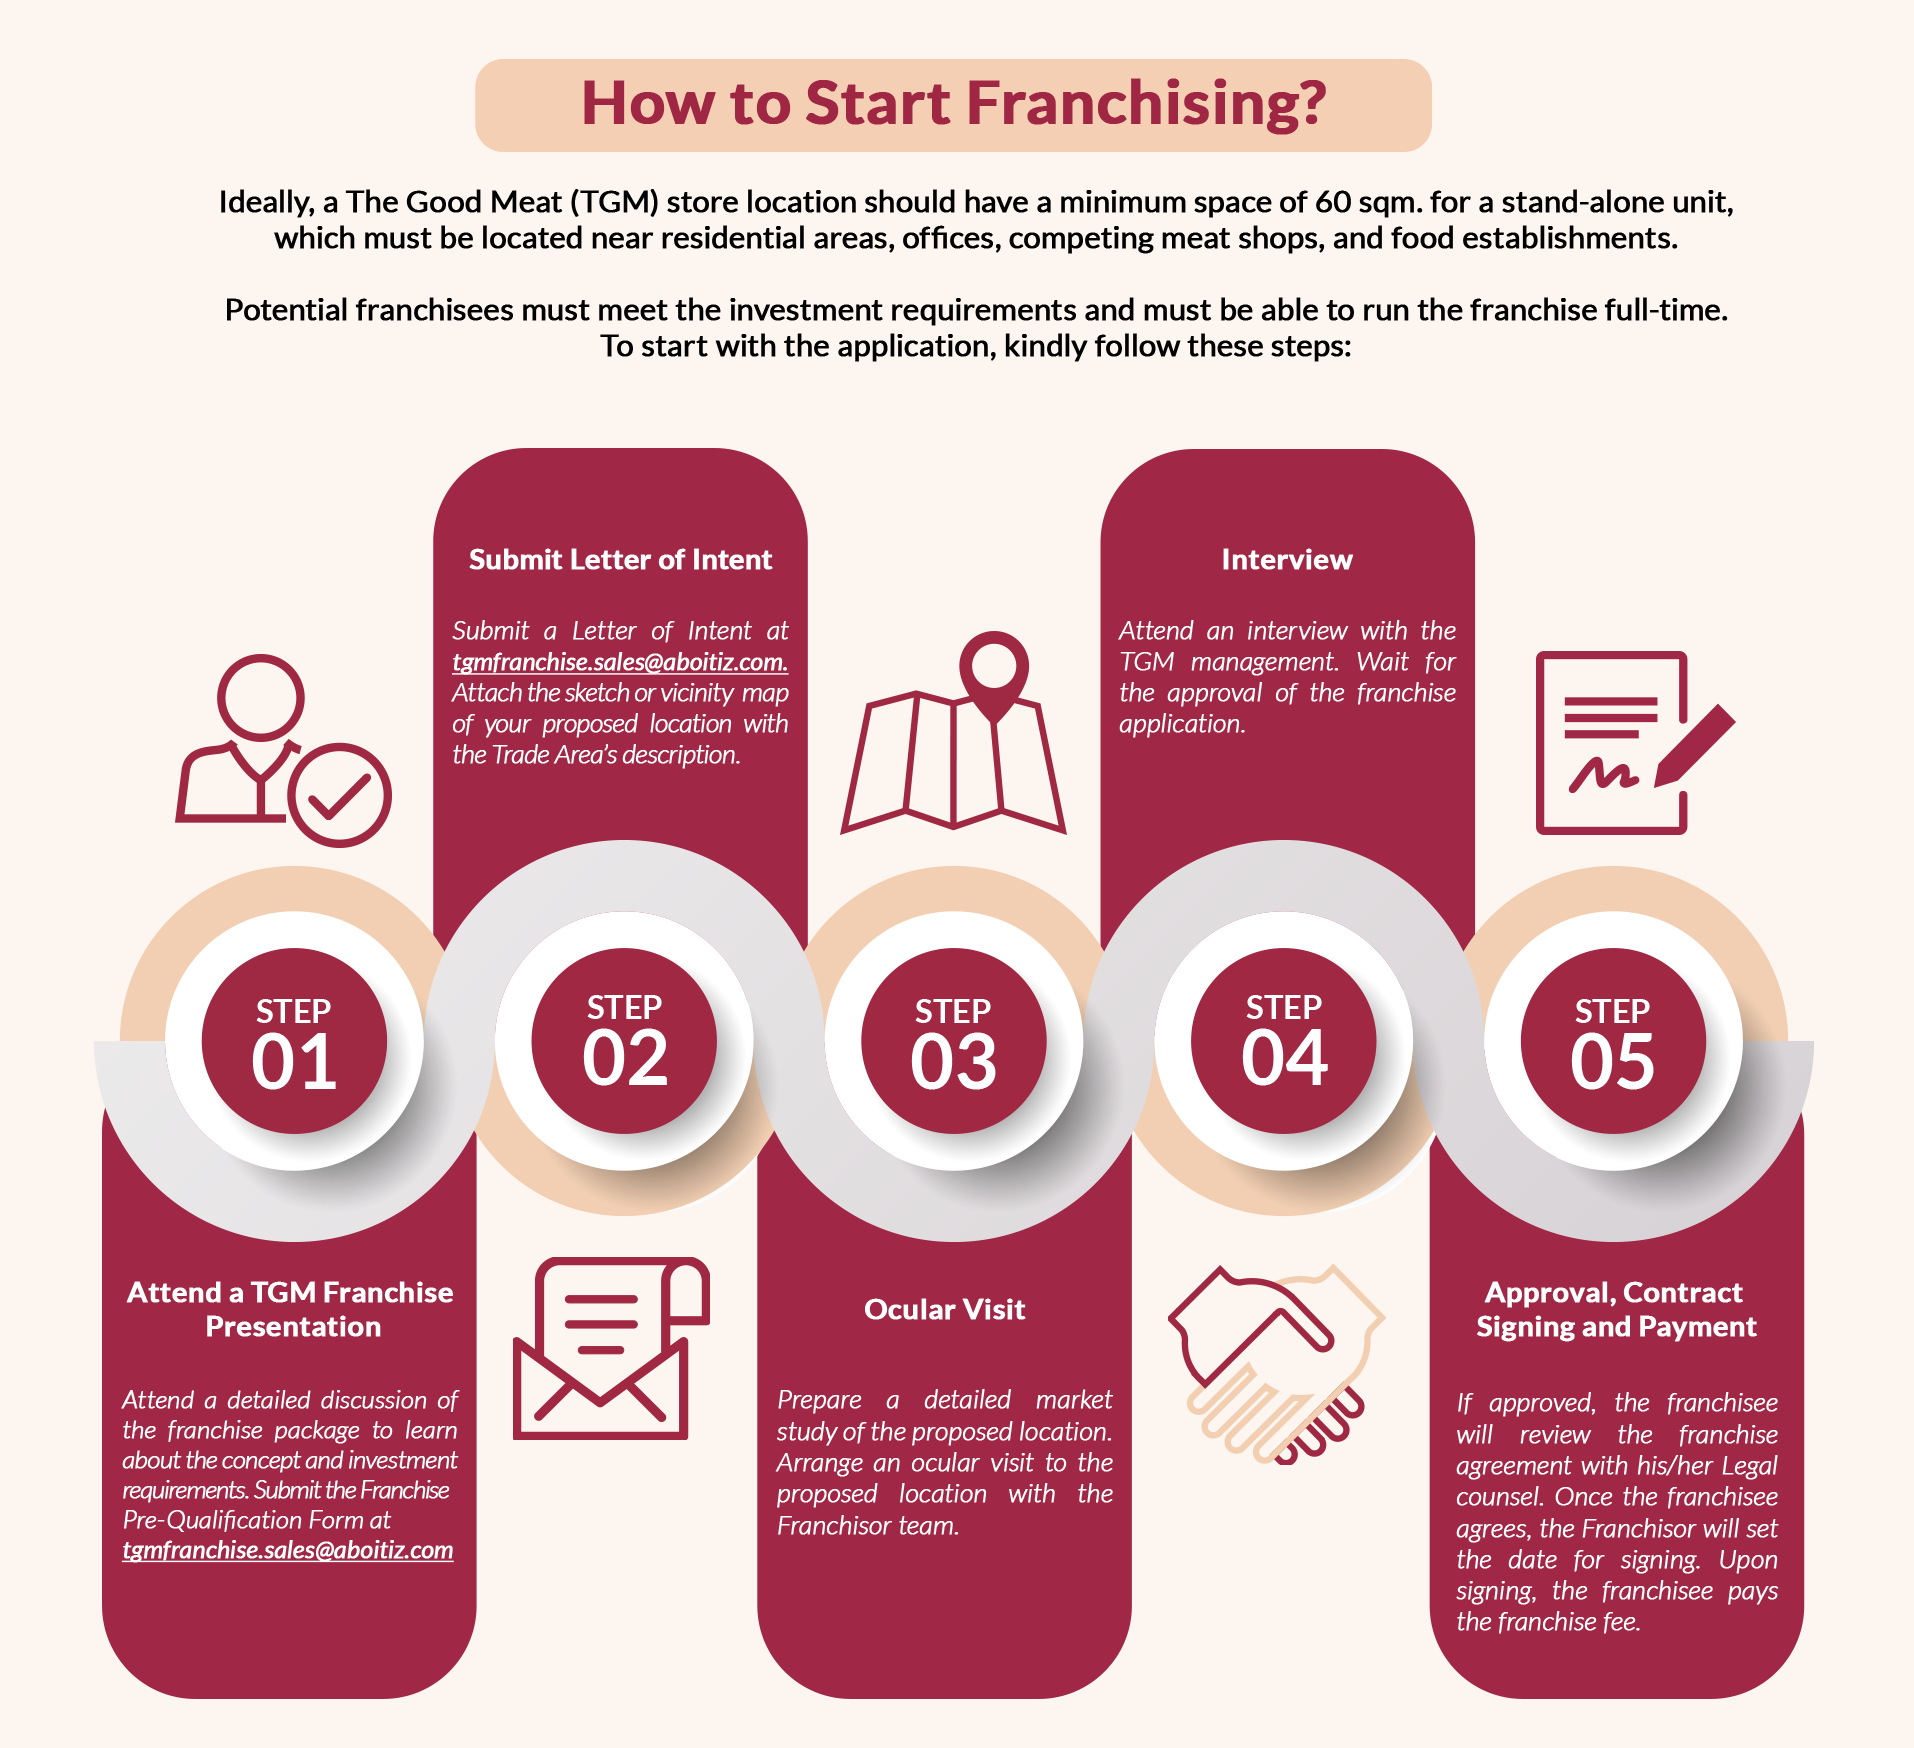 Guide on How To Start Franchising a TGM meat shop